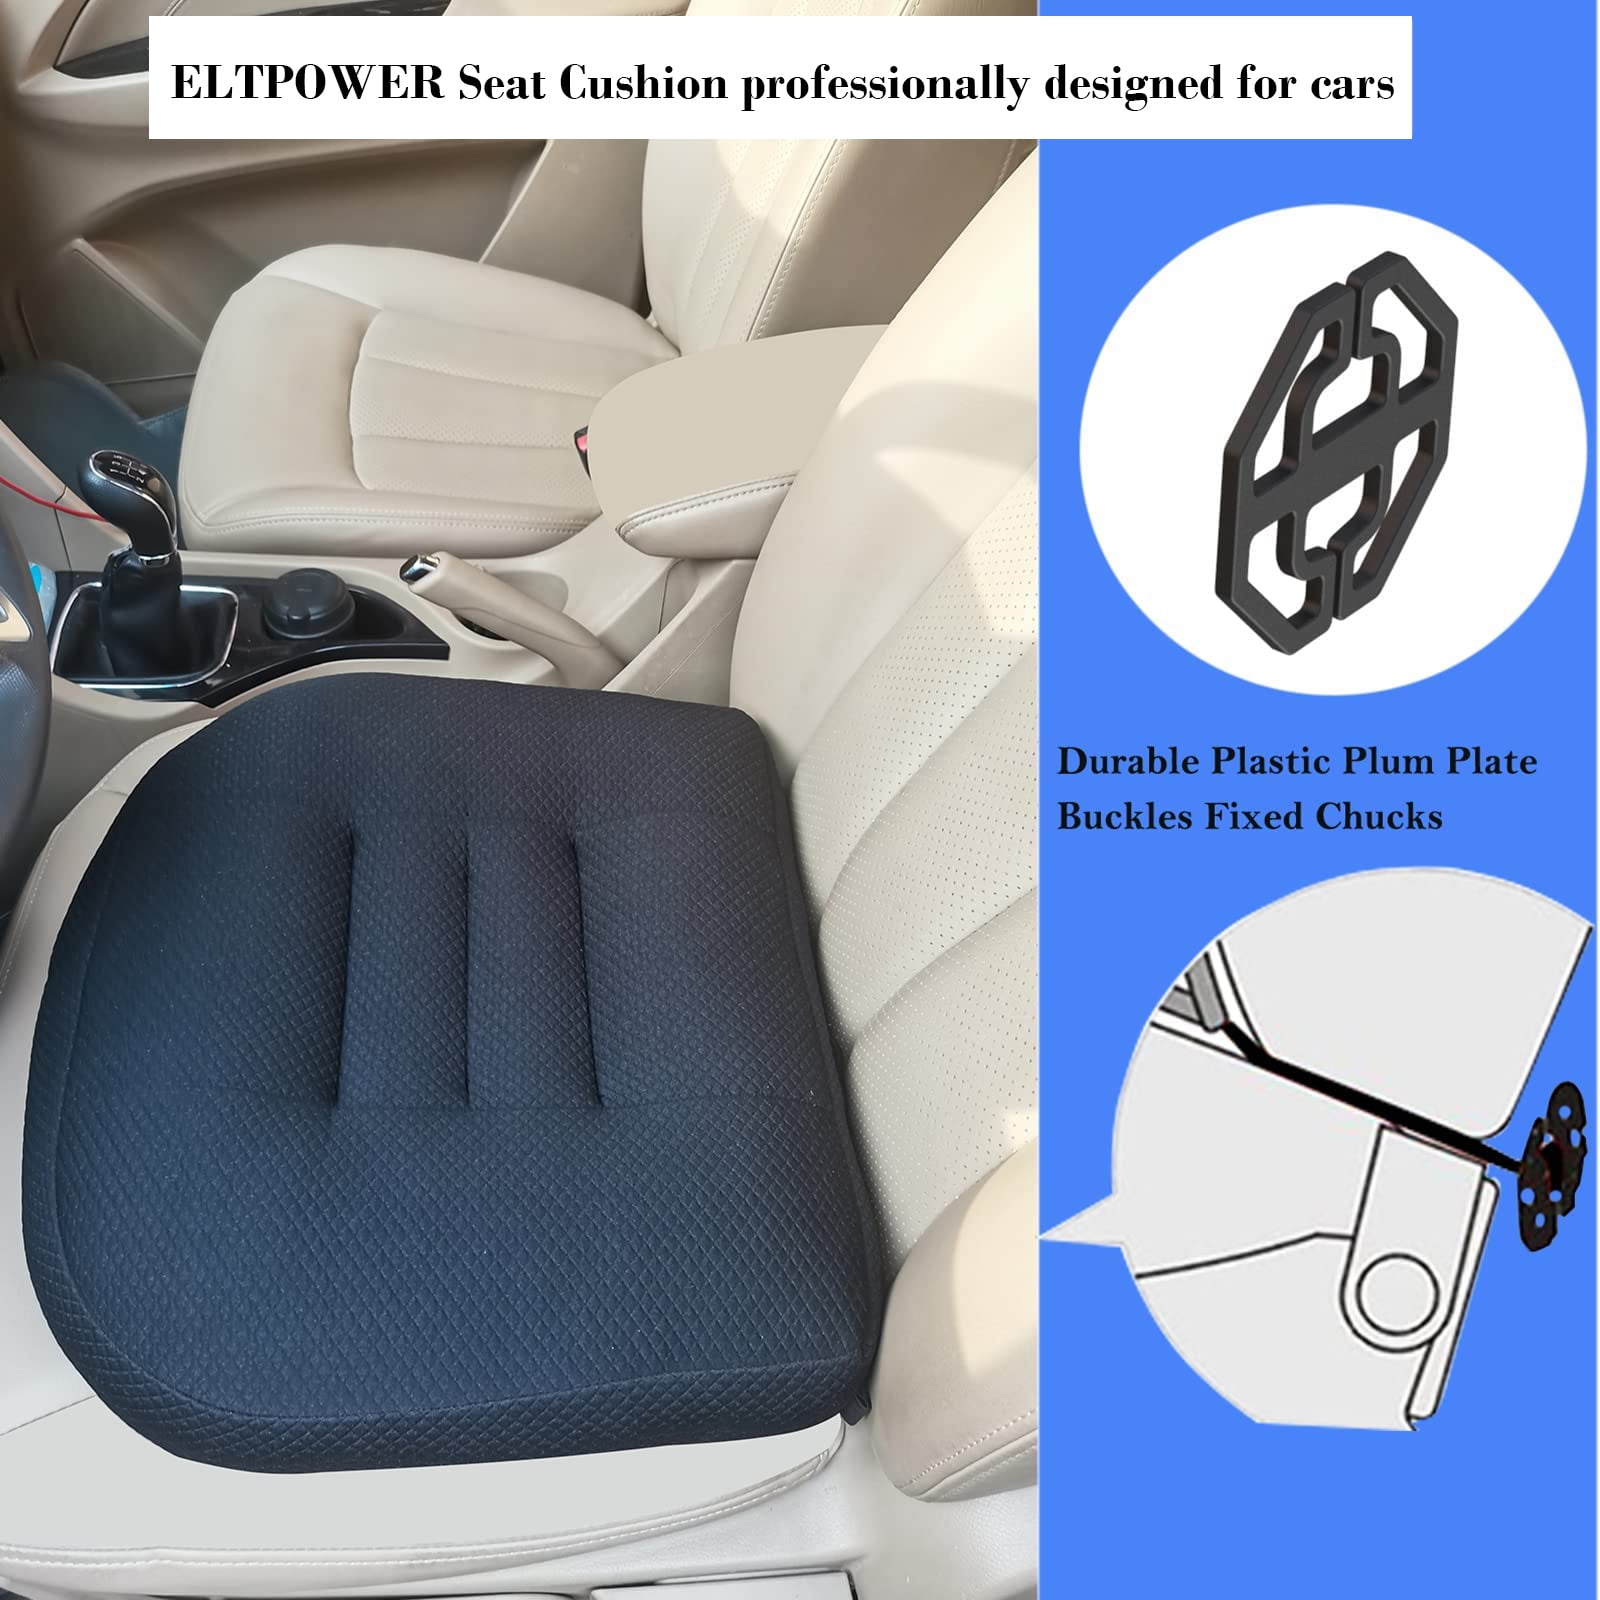 WSGJHB Seat Cushions for Office Chairs, Desk Chair Cushion for Long  Sitting, Office Chair Pad Sitting Seat Pillow for Office Chair, Trucks,Car